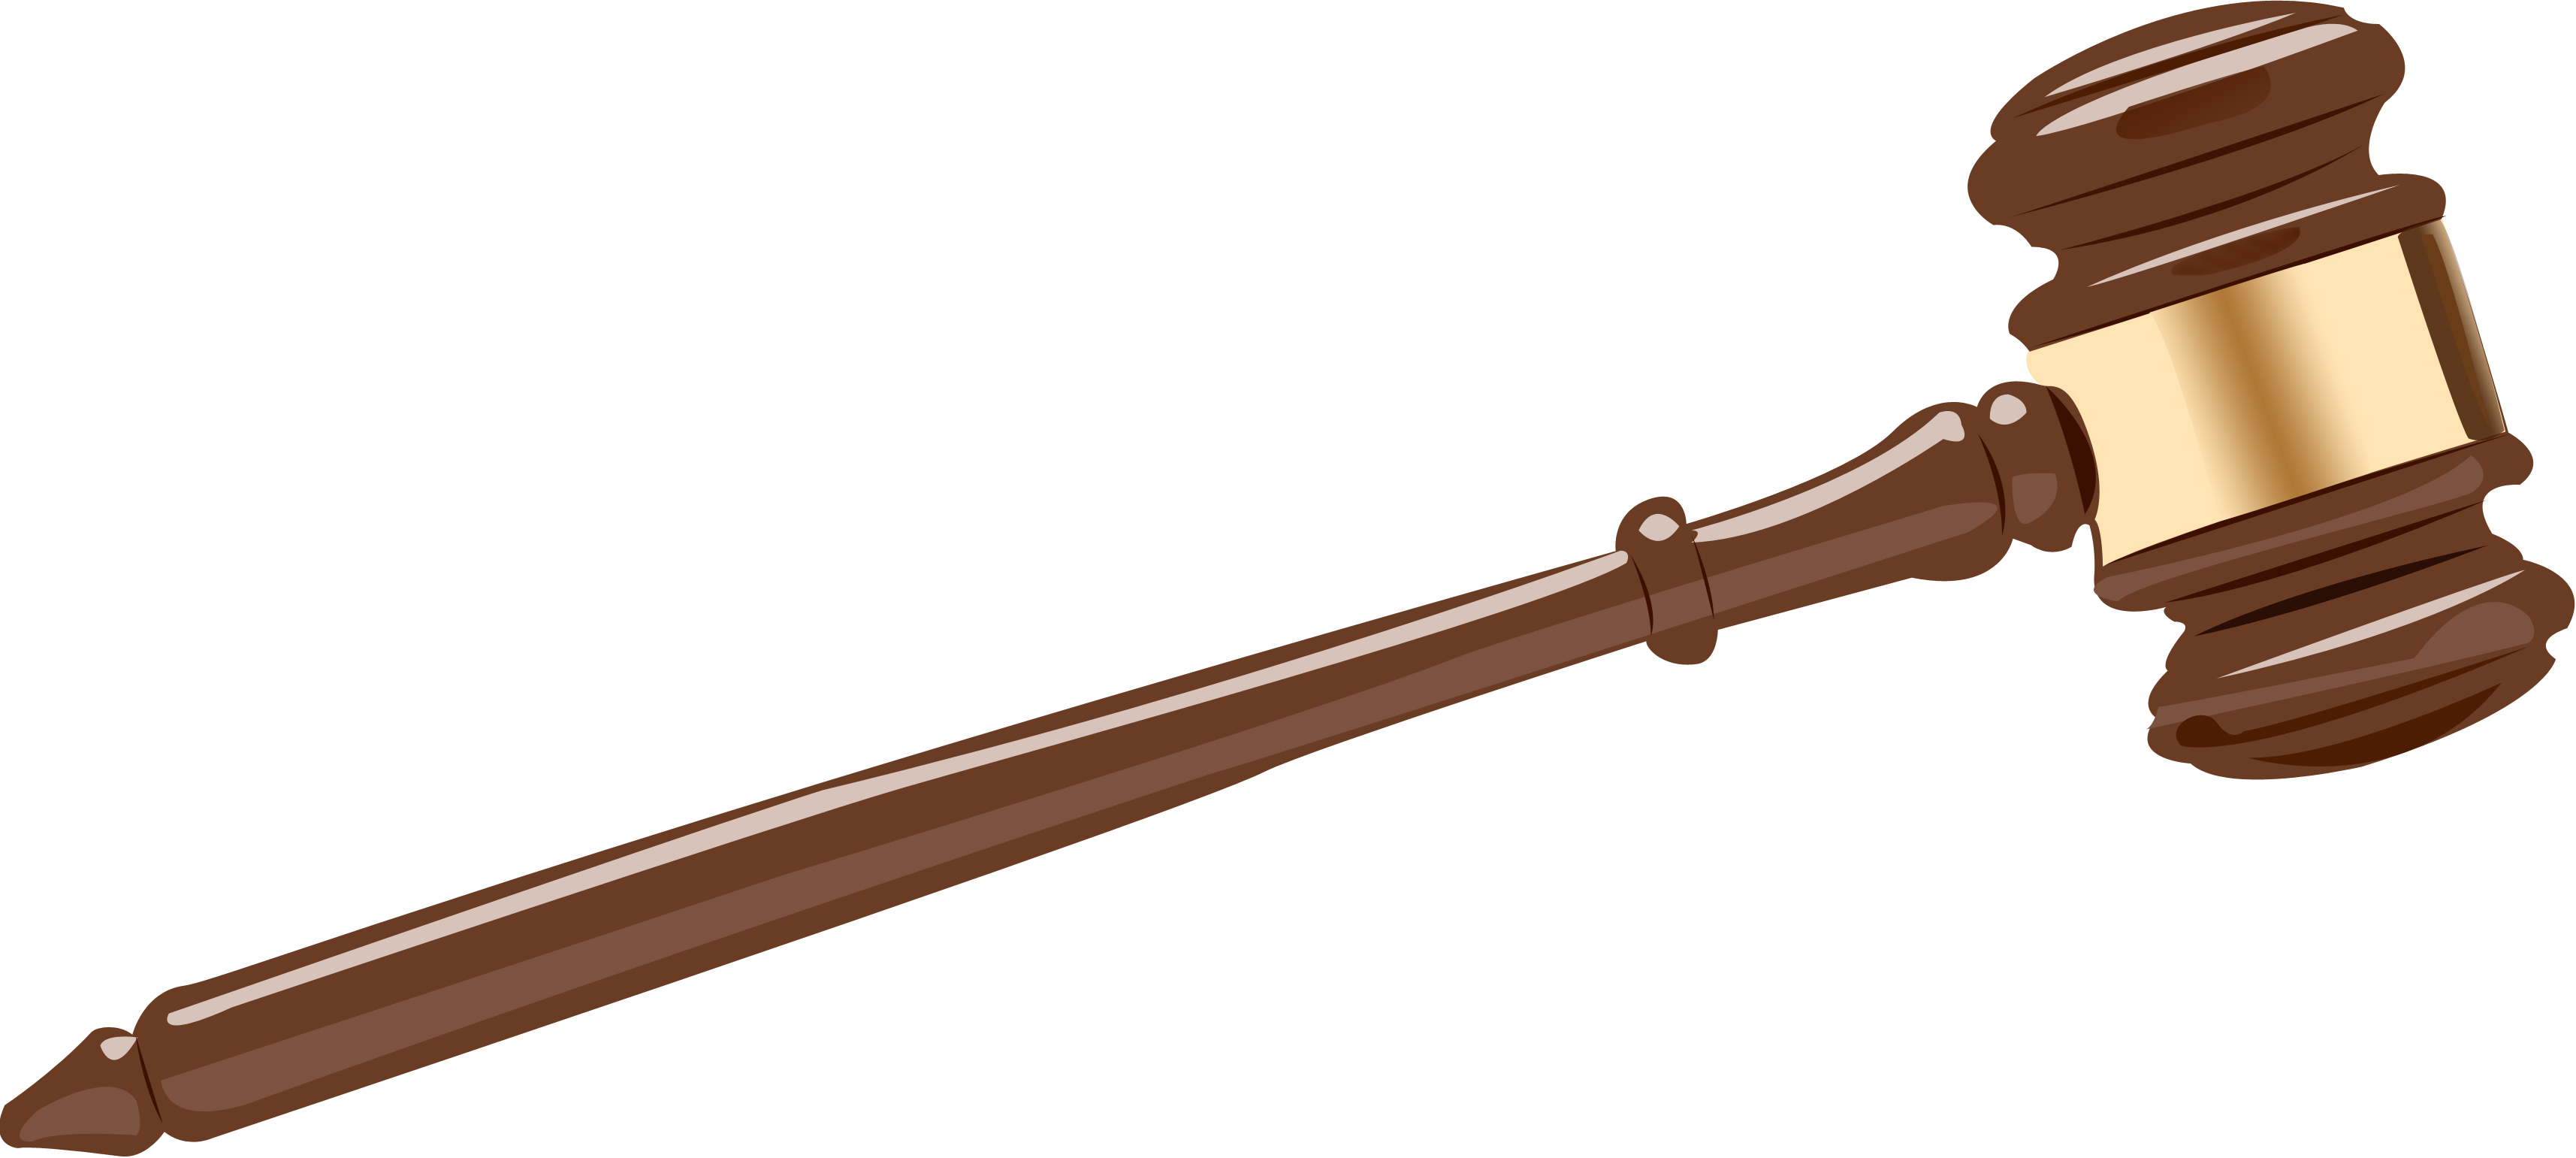 Auction gavel clipart free